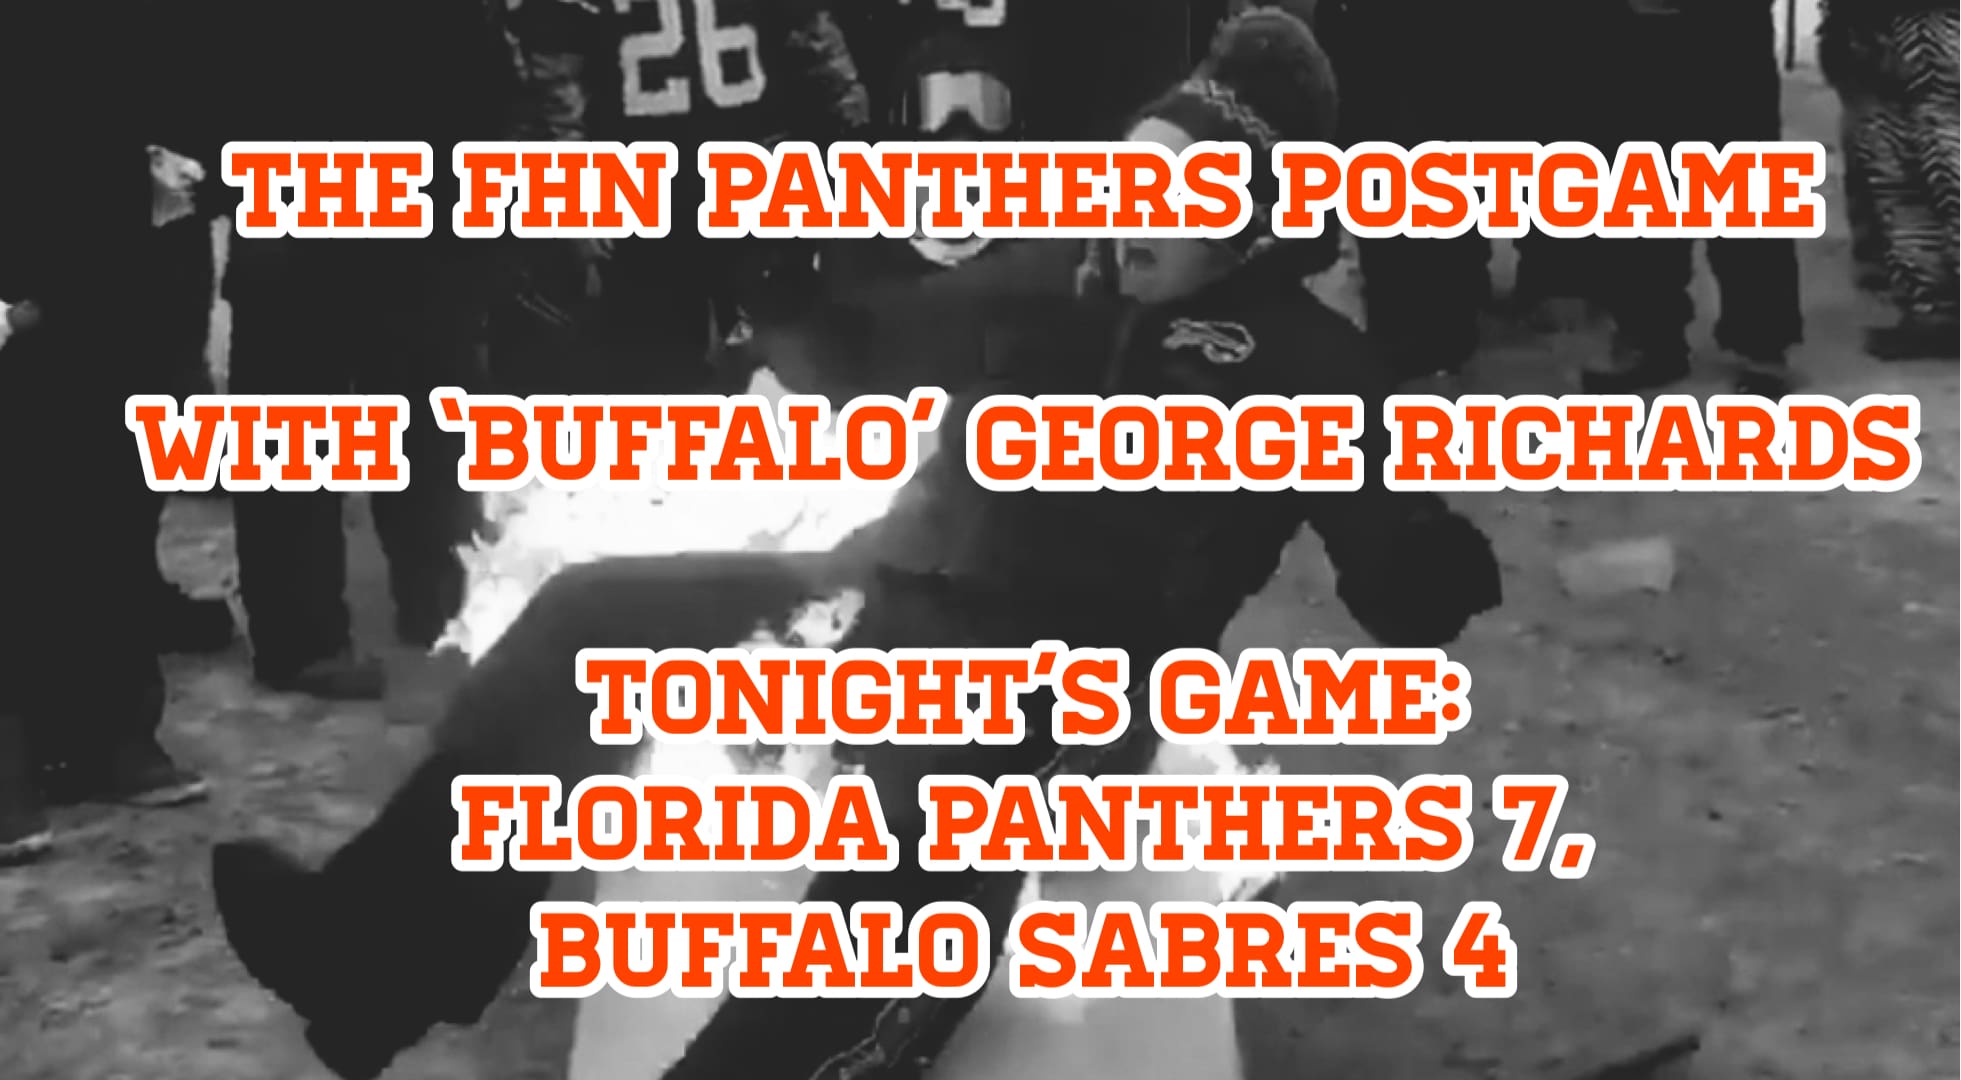 Fhn panthers postgame buffalo